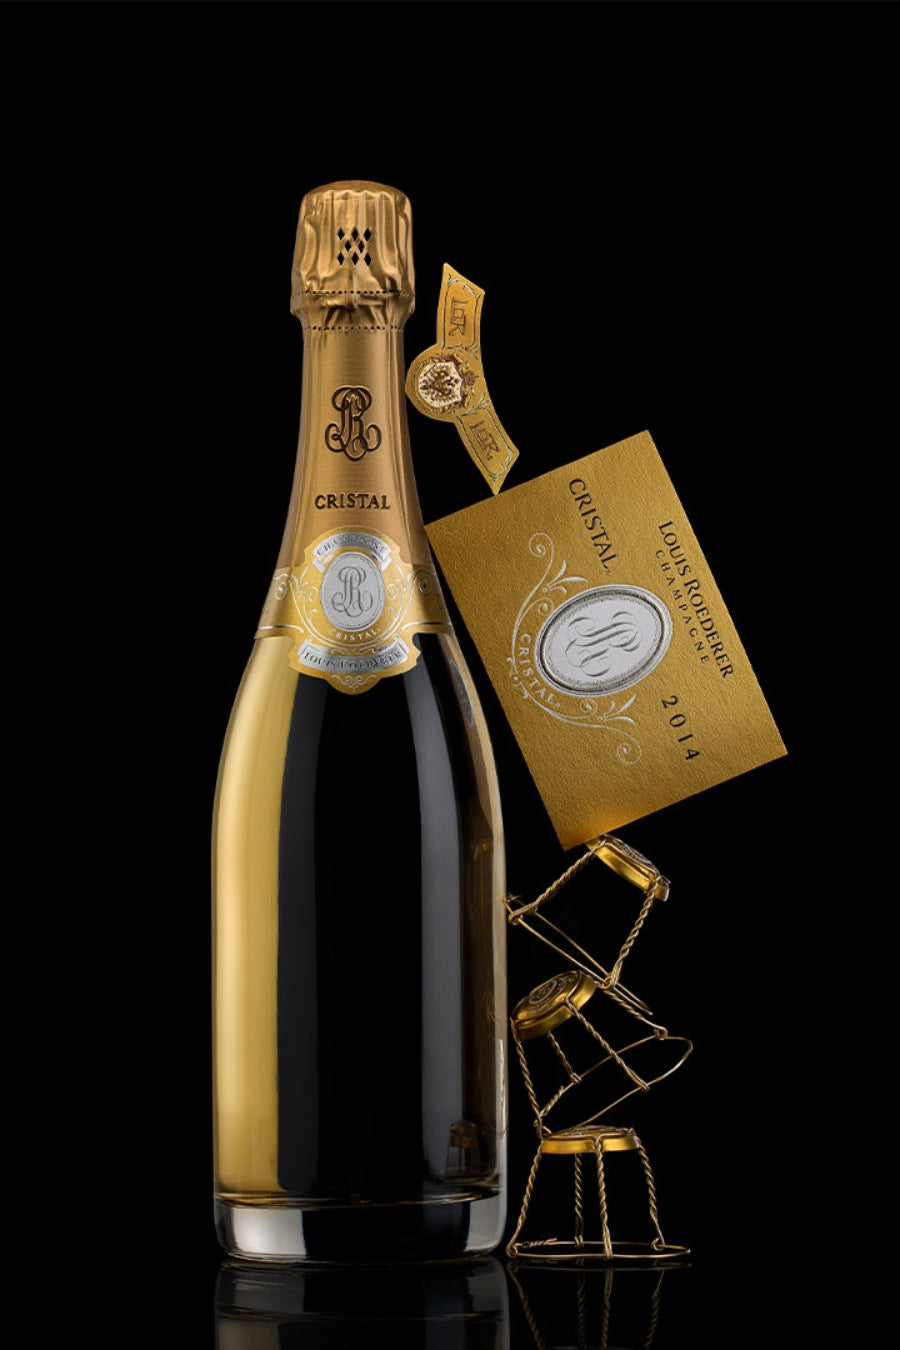 Louis Roederer Cristal Champagne 2015 | Iconic Luxury Champagne |  BuyWinesOnline